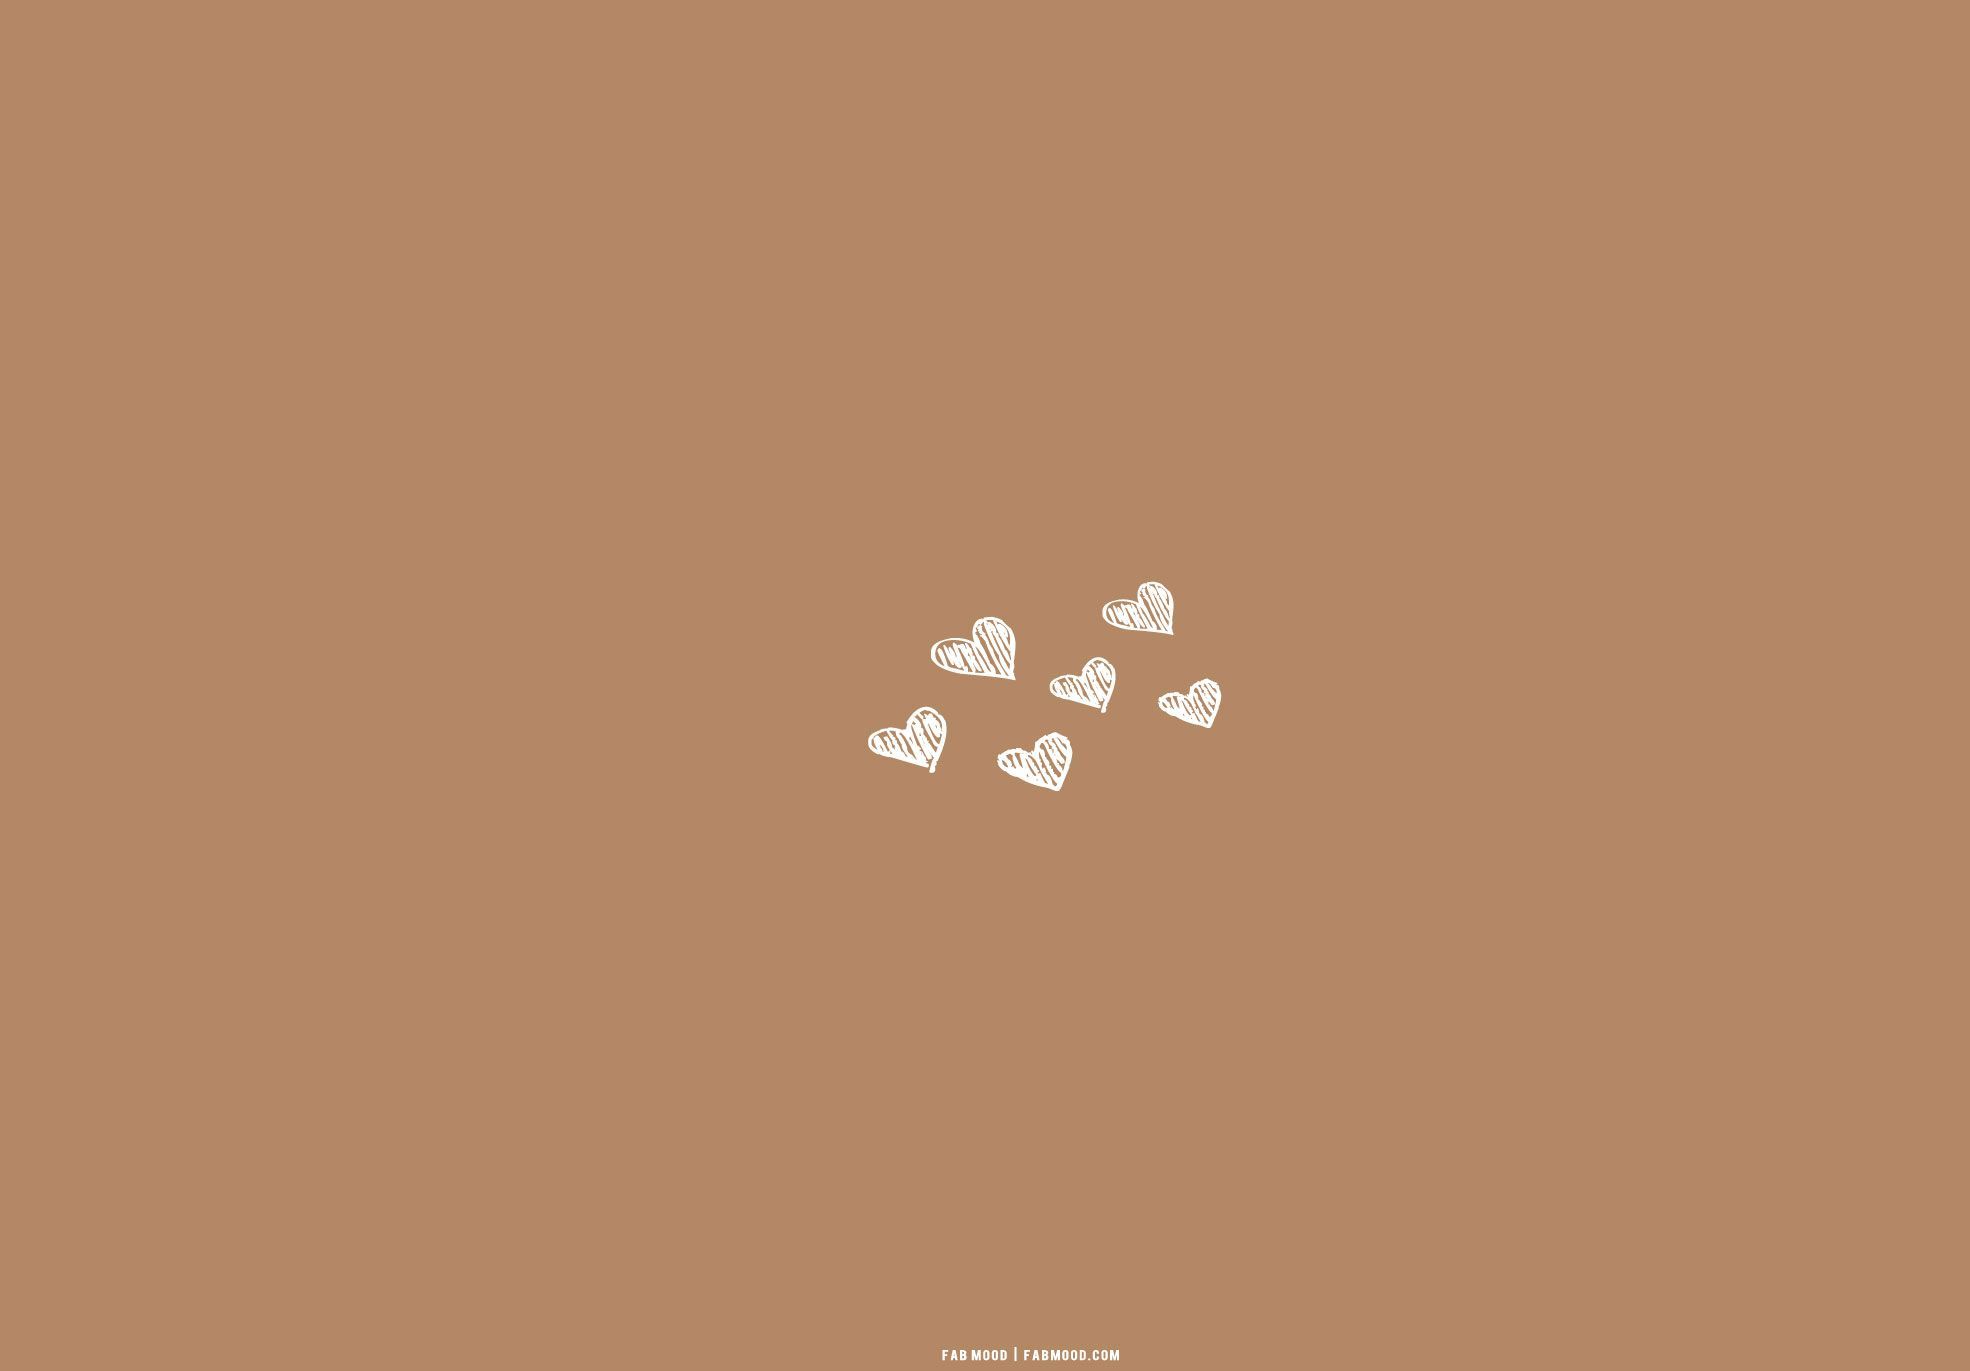 A brown background with white hearts on it - Desktop, laptop, minimalist beige, brown, light brown, nails, computer, wedding